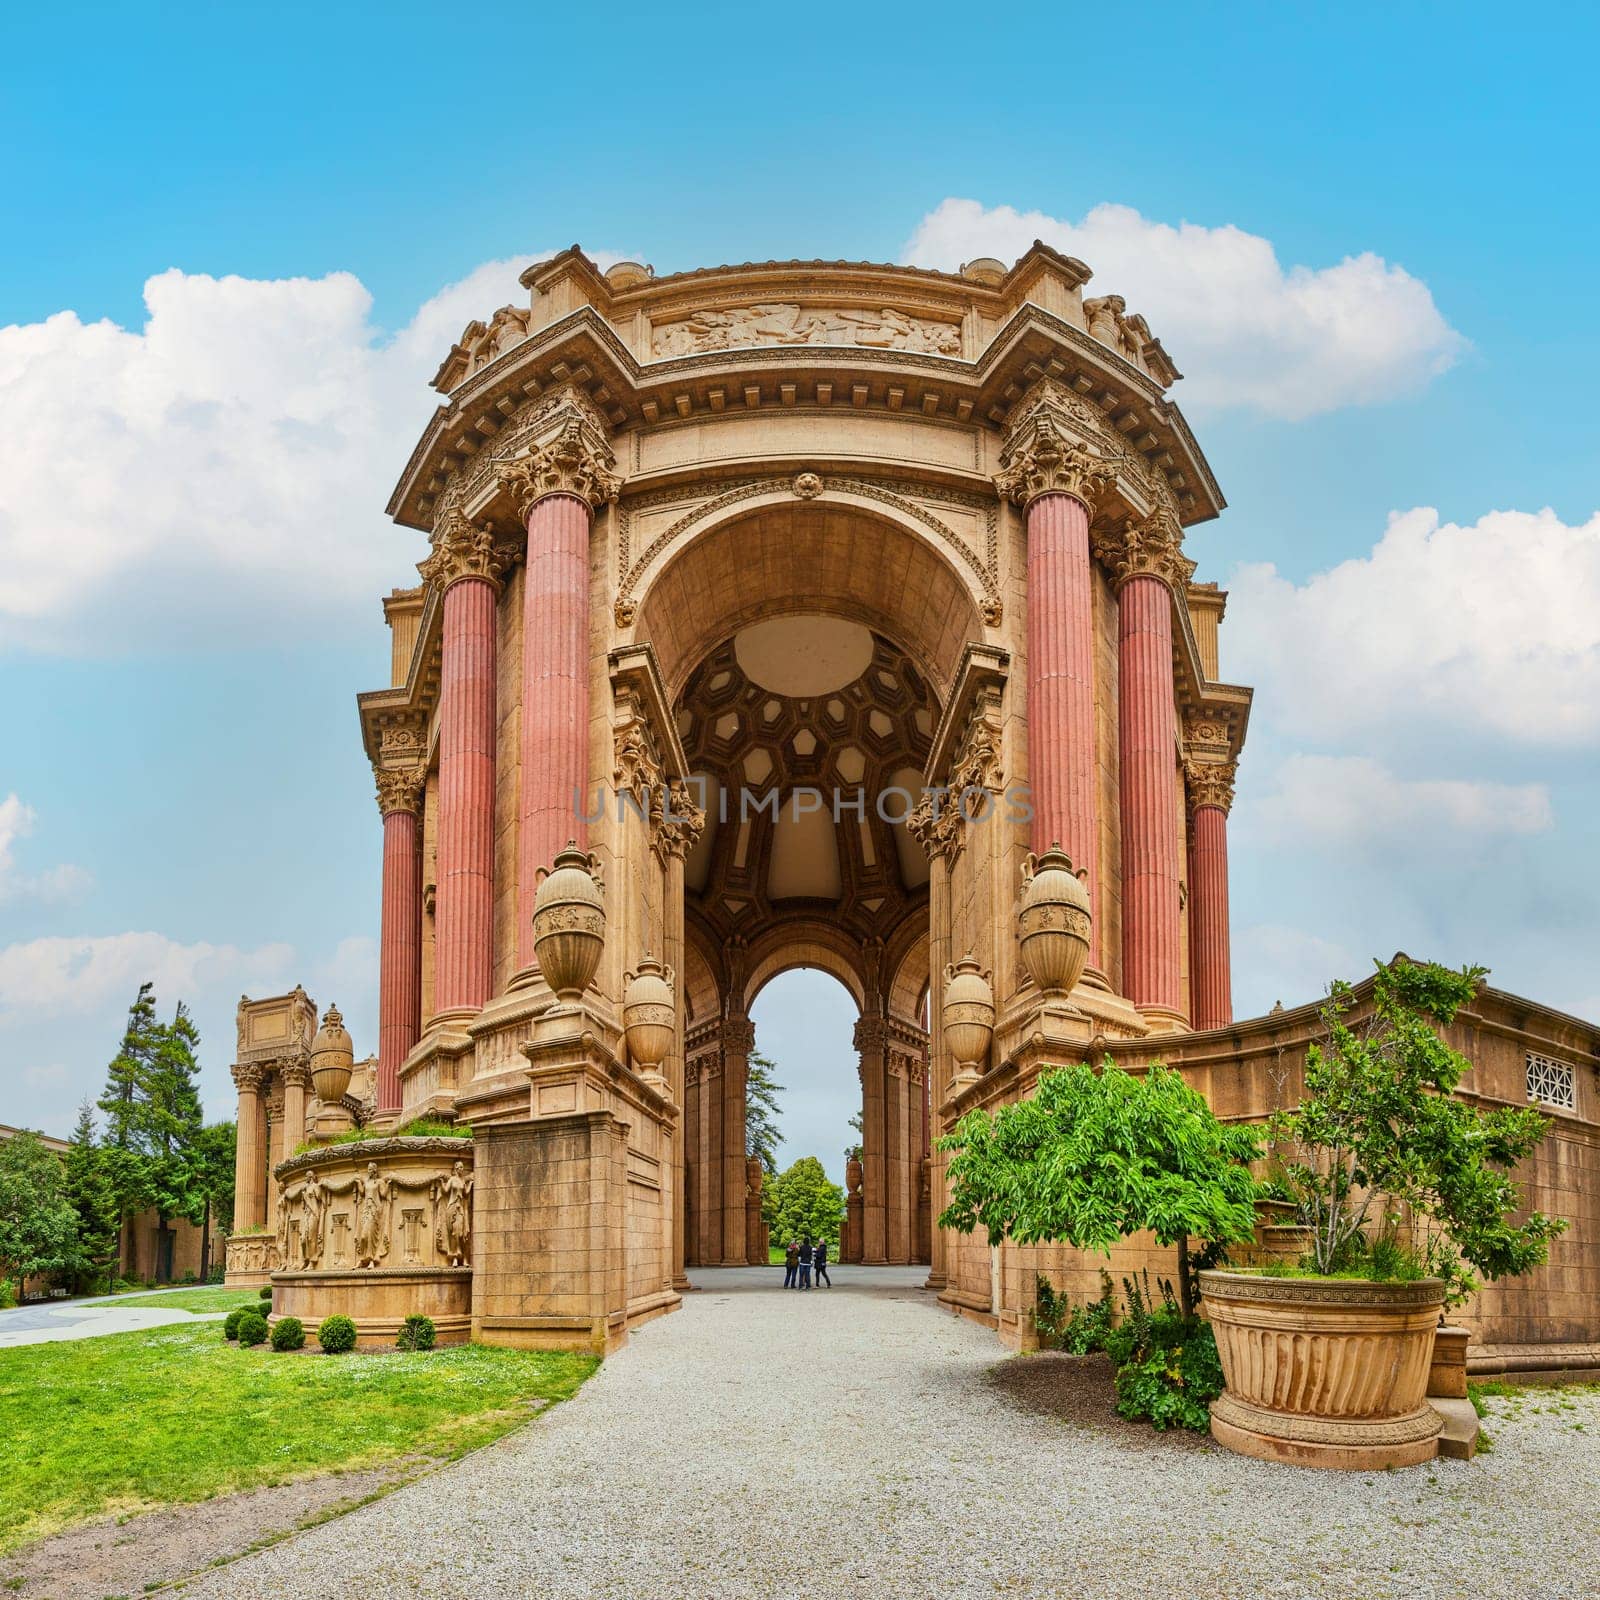 Panorama Palace of Fine Arts with people standing under center of dome structure on blue sky day by njproductions